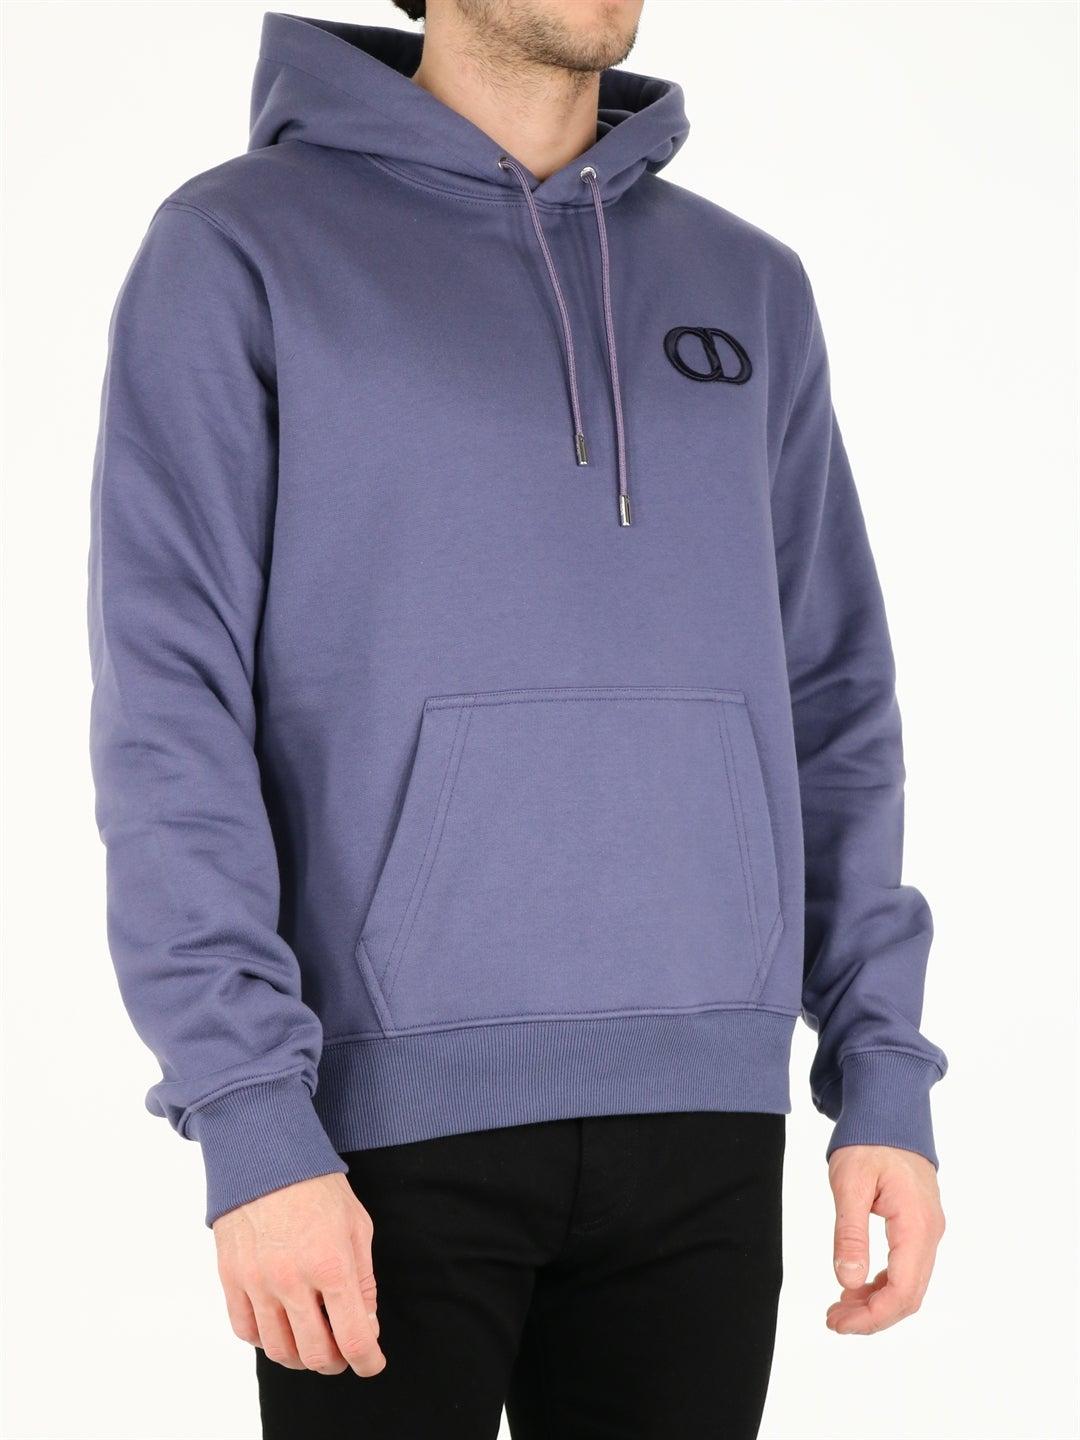 DIOR CD ICON LOGO EMBROIDERED HOODIE | www.causus.be